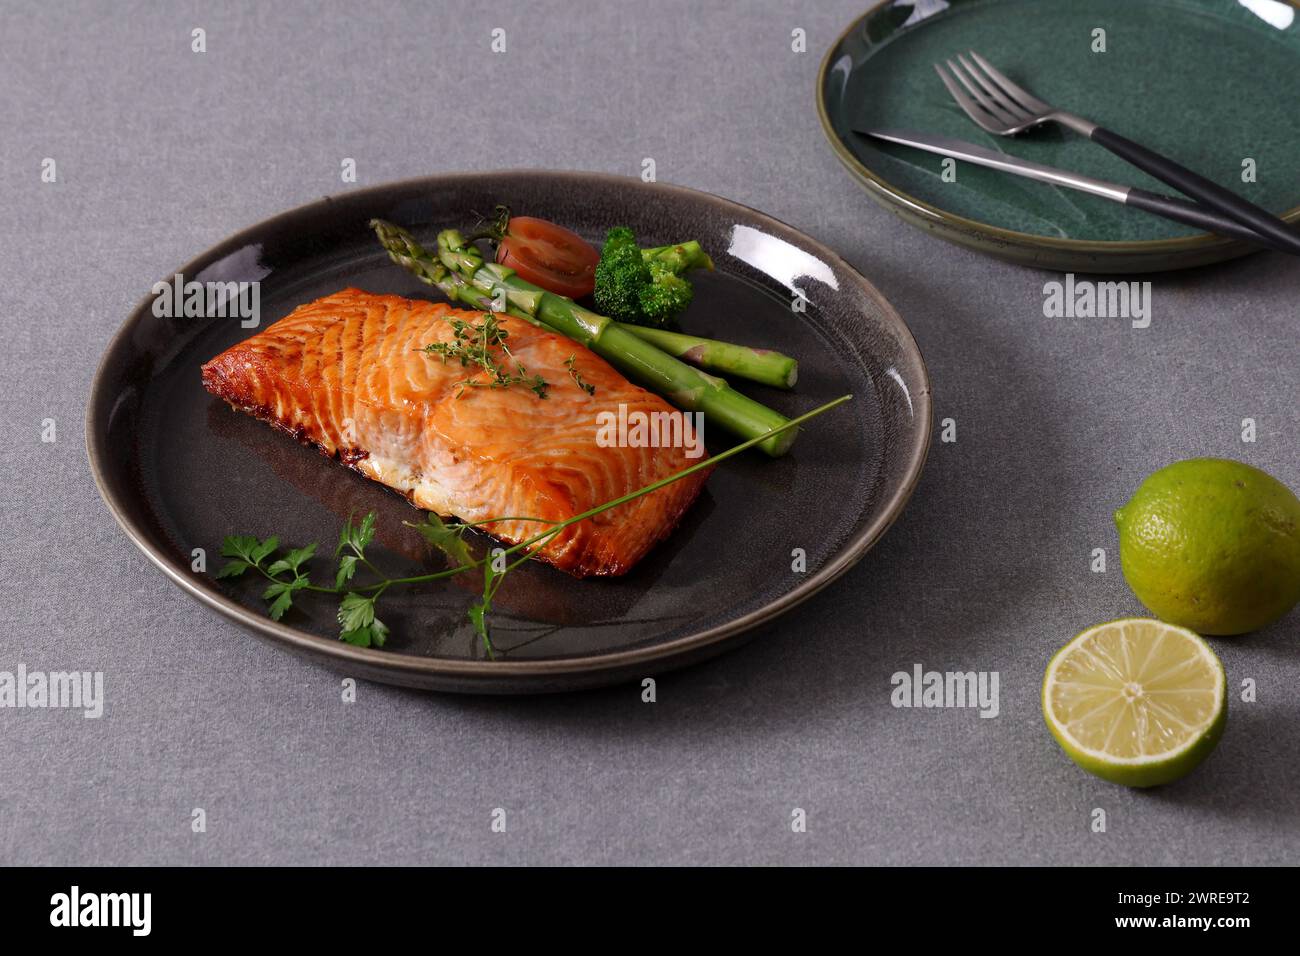 Pan-seared salmon steaks are a delicious and healthy dish. The salmon is cooked to perfection, so the skin is crispy and the flesh is moist. Stock Photo